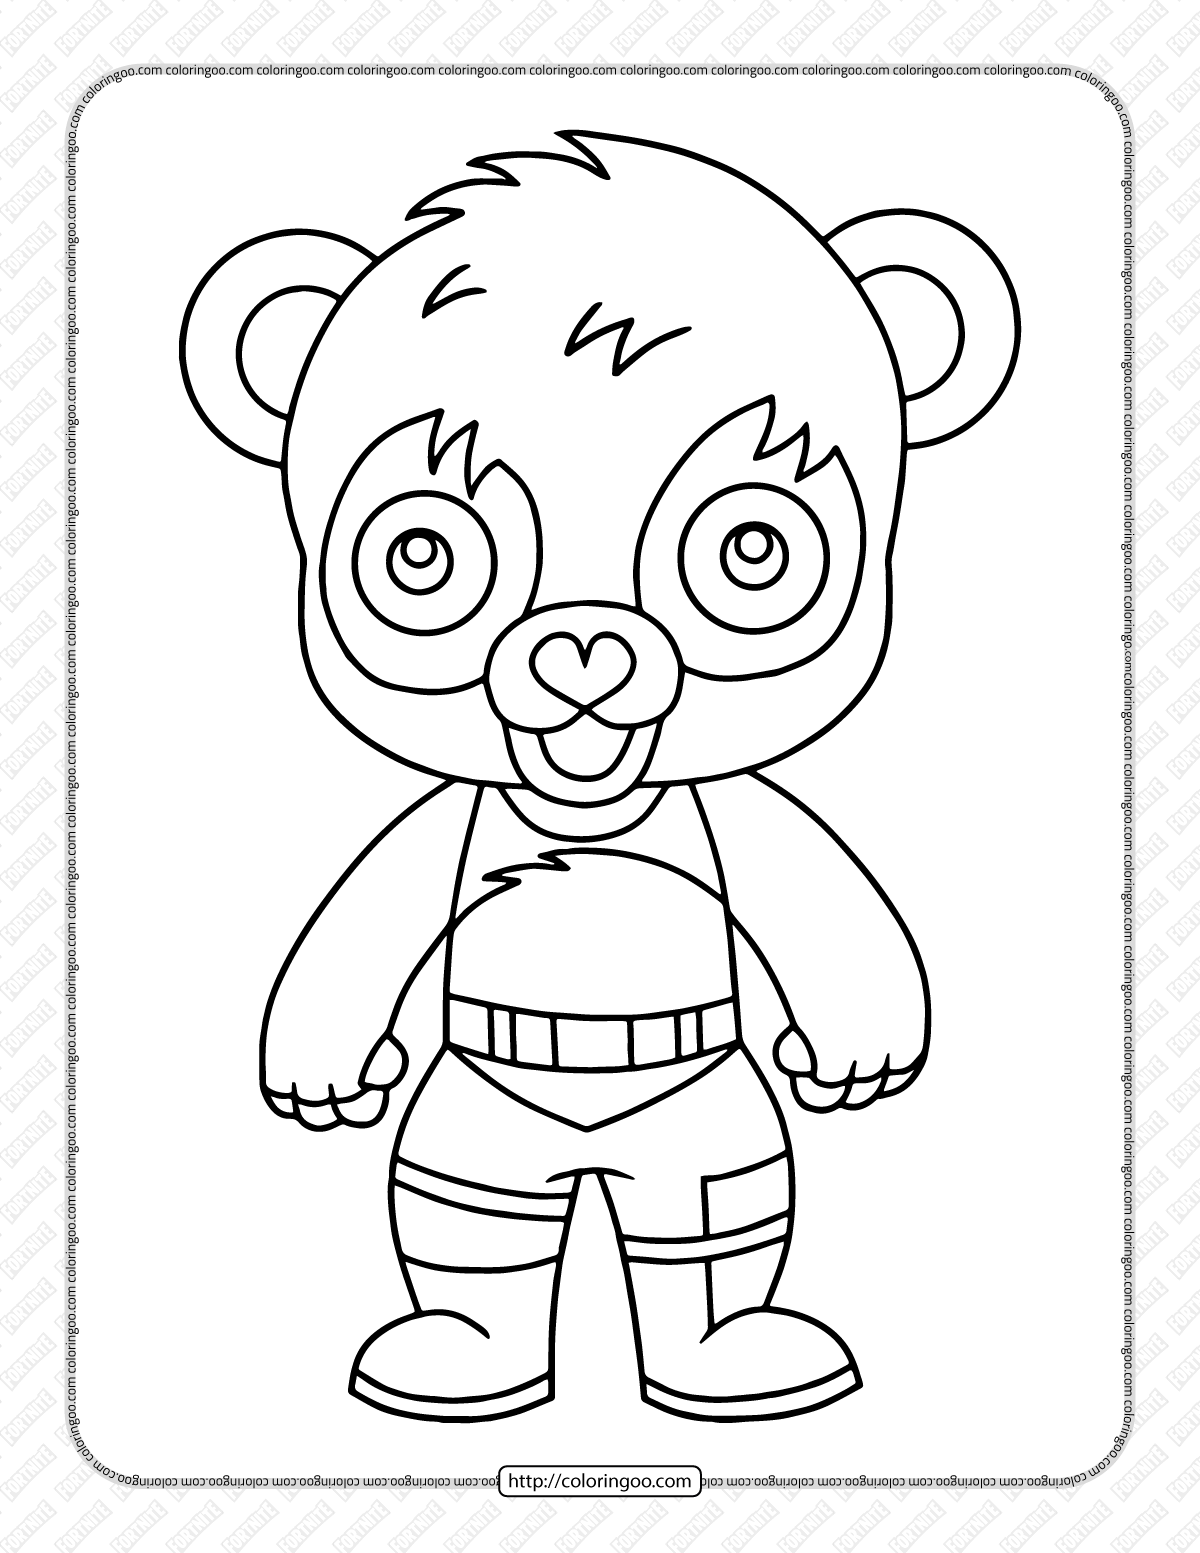 chibi fortnite coloring pages 21